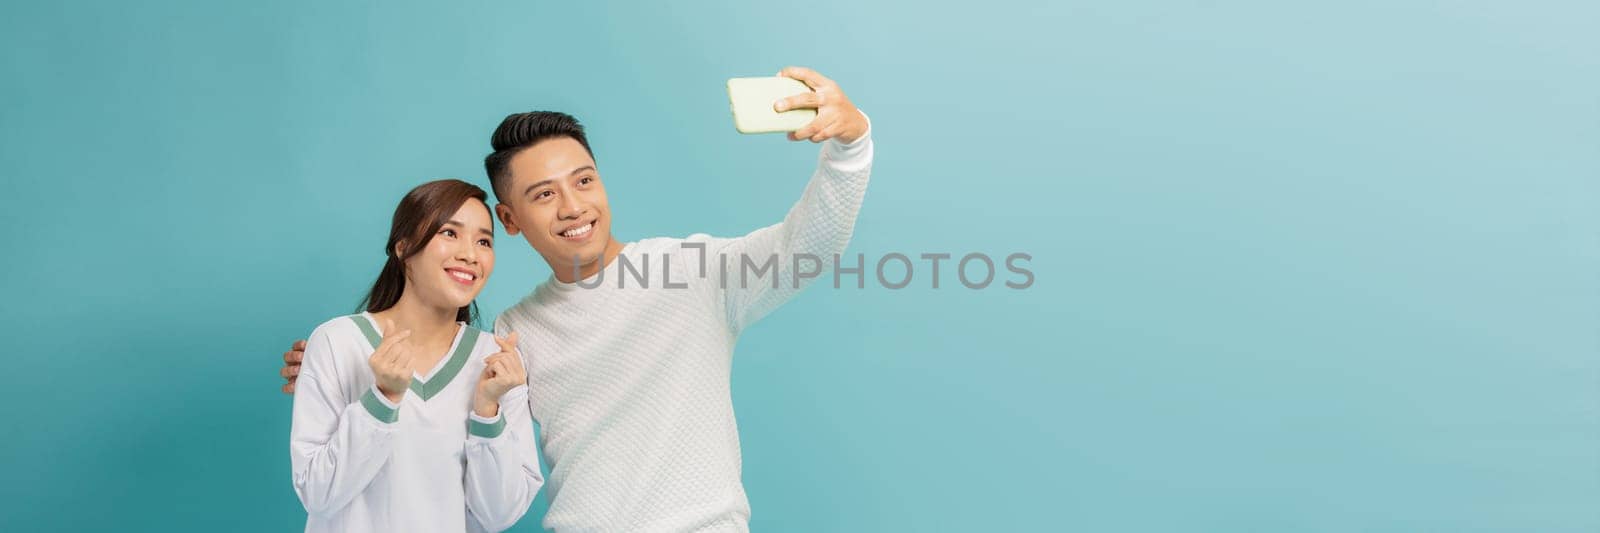 Smiling asian couple having fun together while making selfie on smartphone over blue background